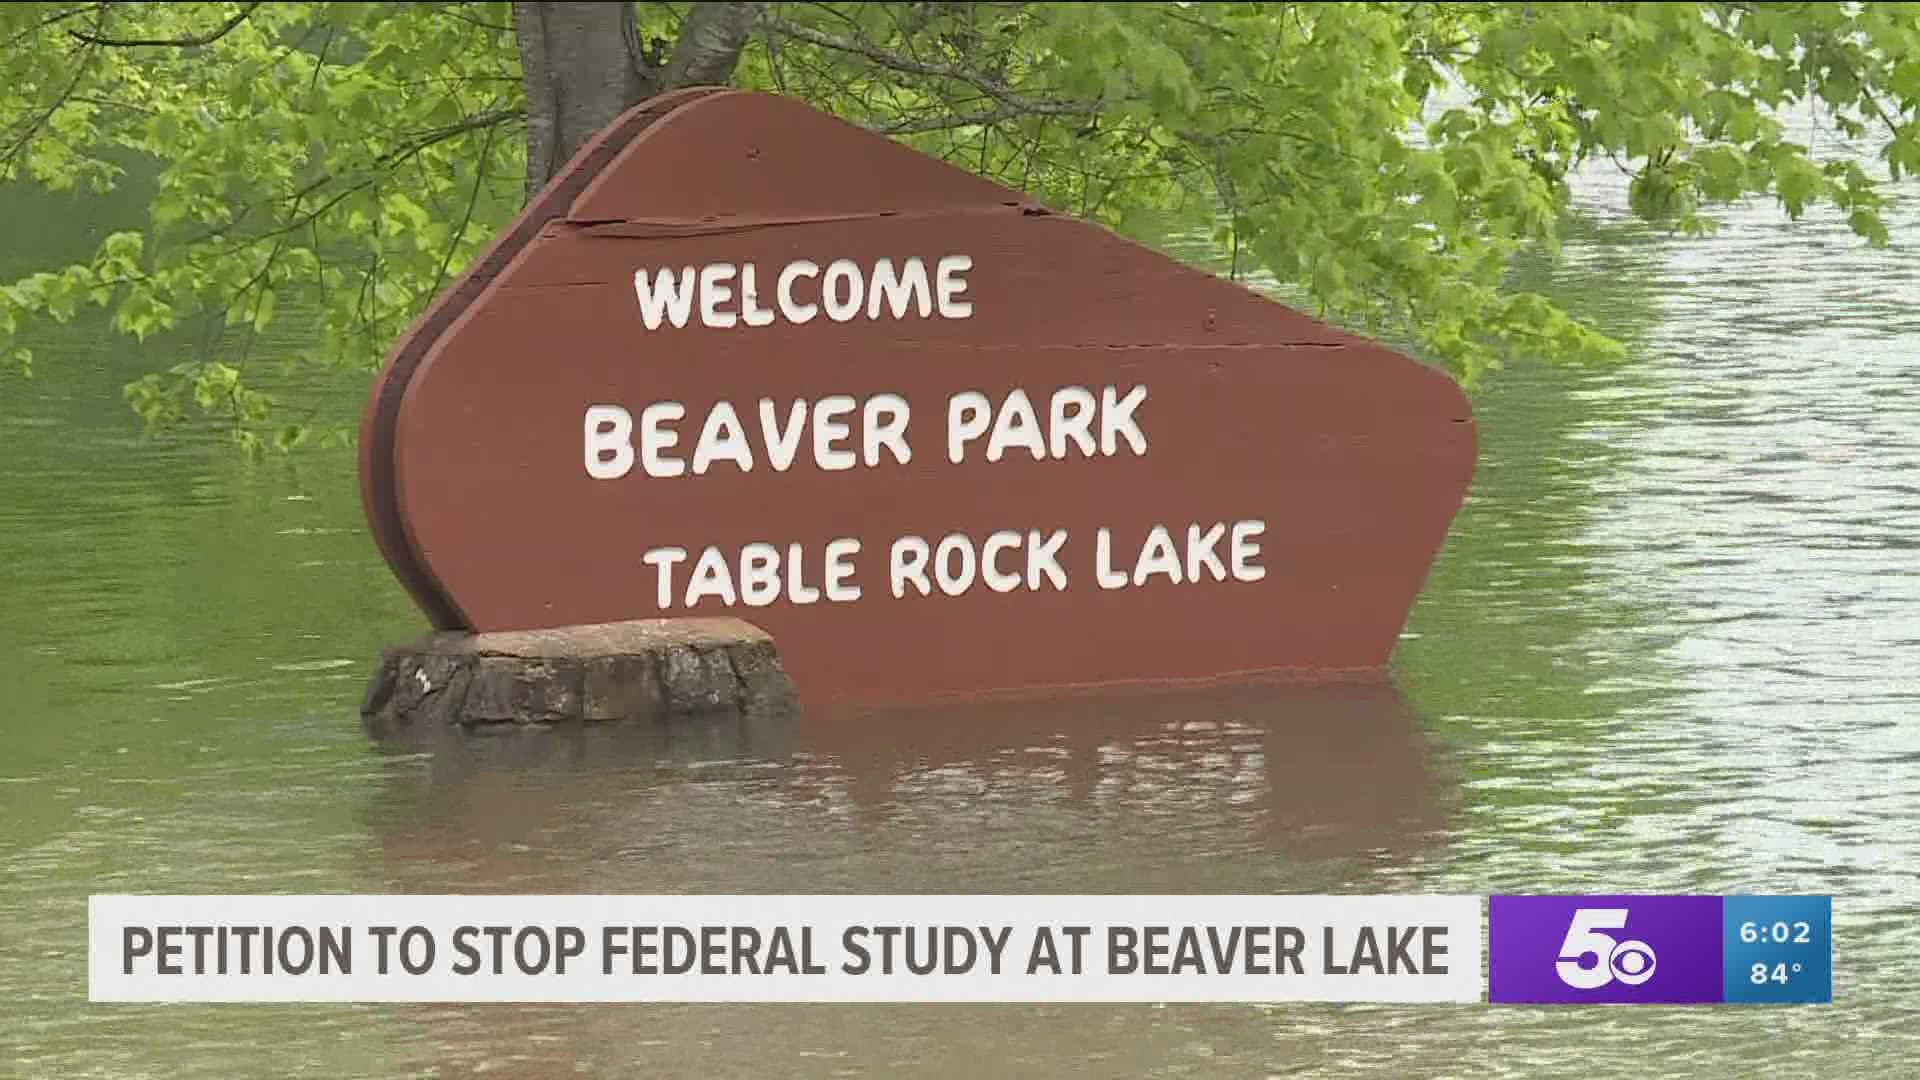 The U.S. Army Core of Engineers is in the process of studying the impact of flooding on Beaver Lake. Some people are petitioning to stop the study.